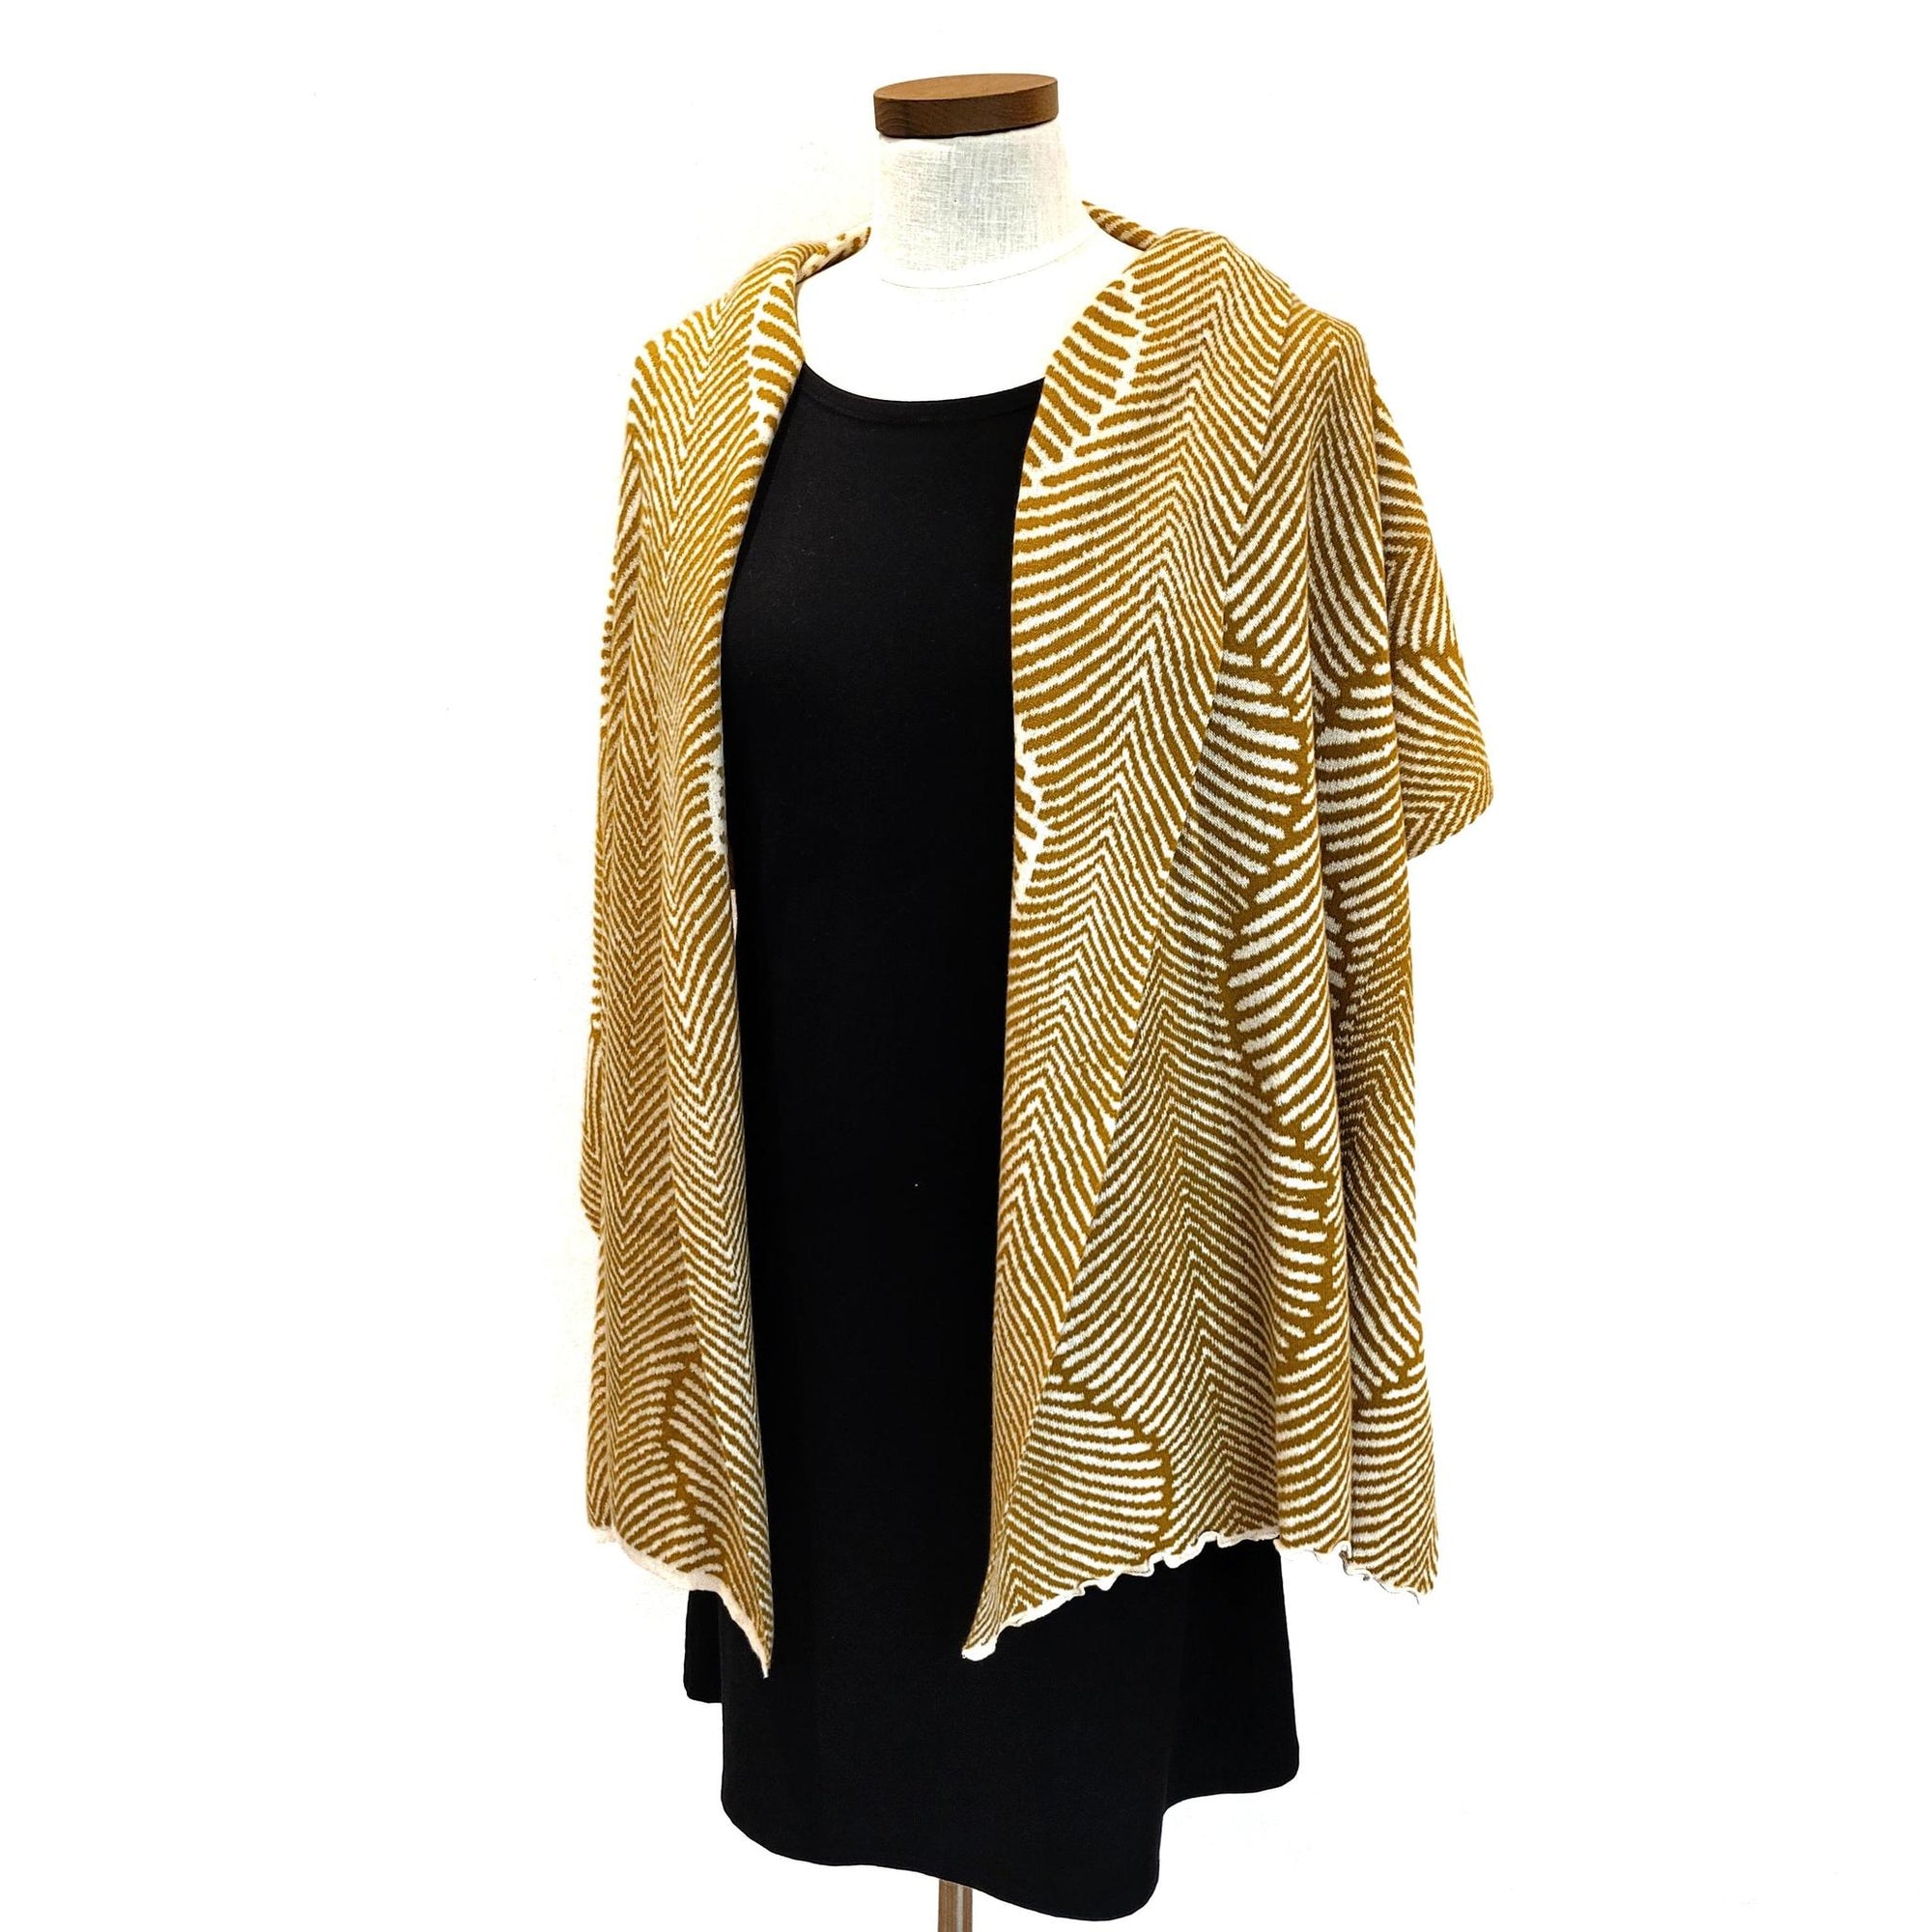 Wrap - Forest Fern in Curry Yellow and Cream by Liamolly